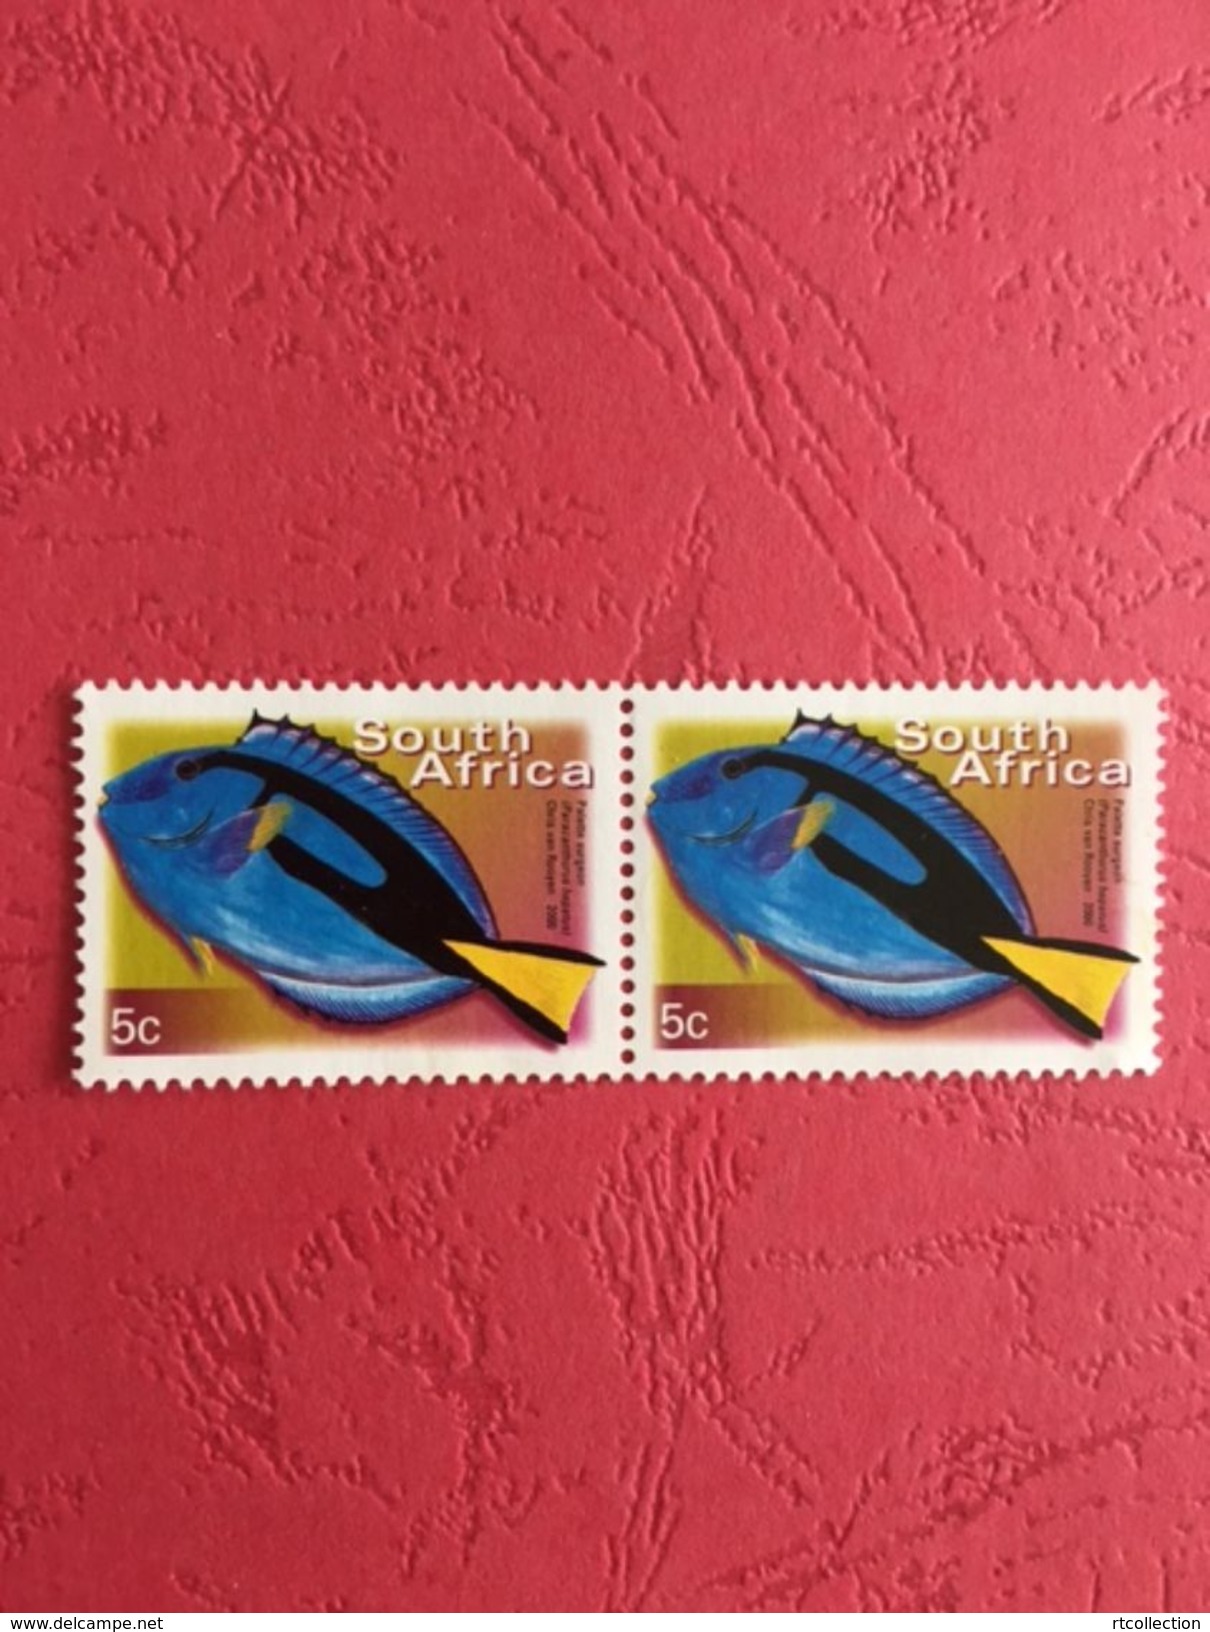 South Africa 2000 Pair Palette Surgeon Fishes Fish Animal Animals Marine Life Sealife Nature Fauna 5c Stamps MNH SG 1205 - Blocs-feuillets